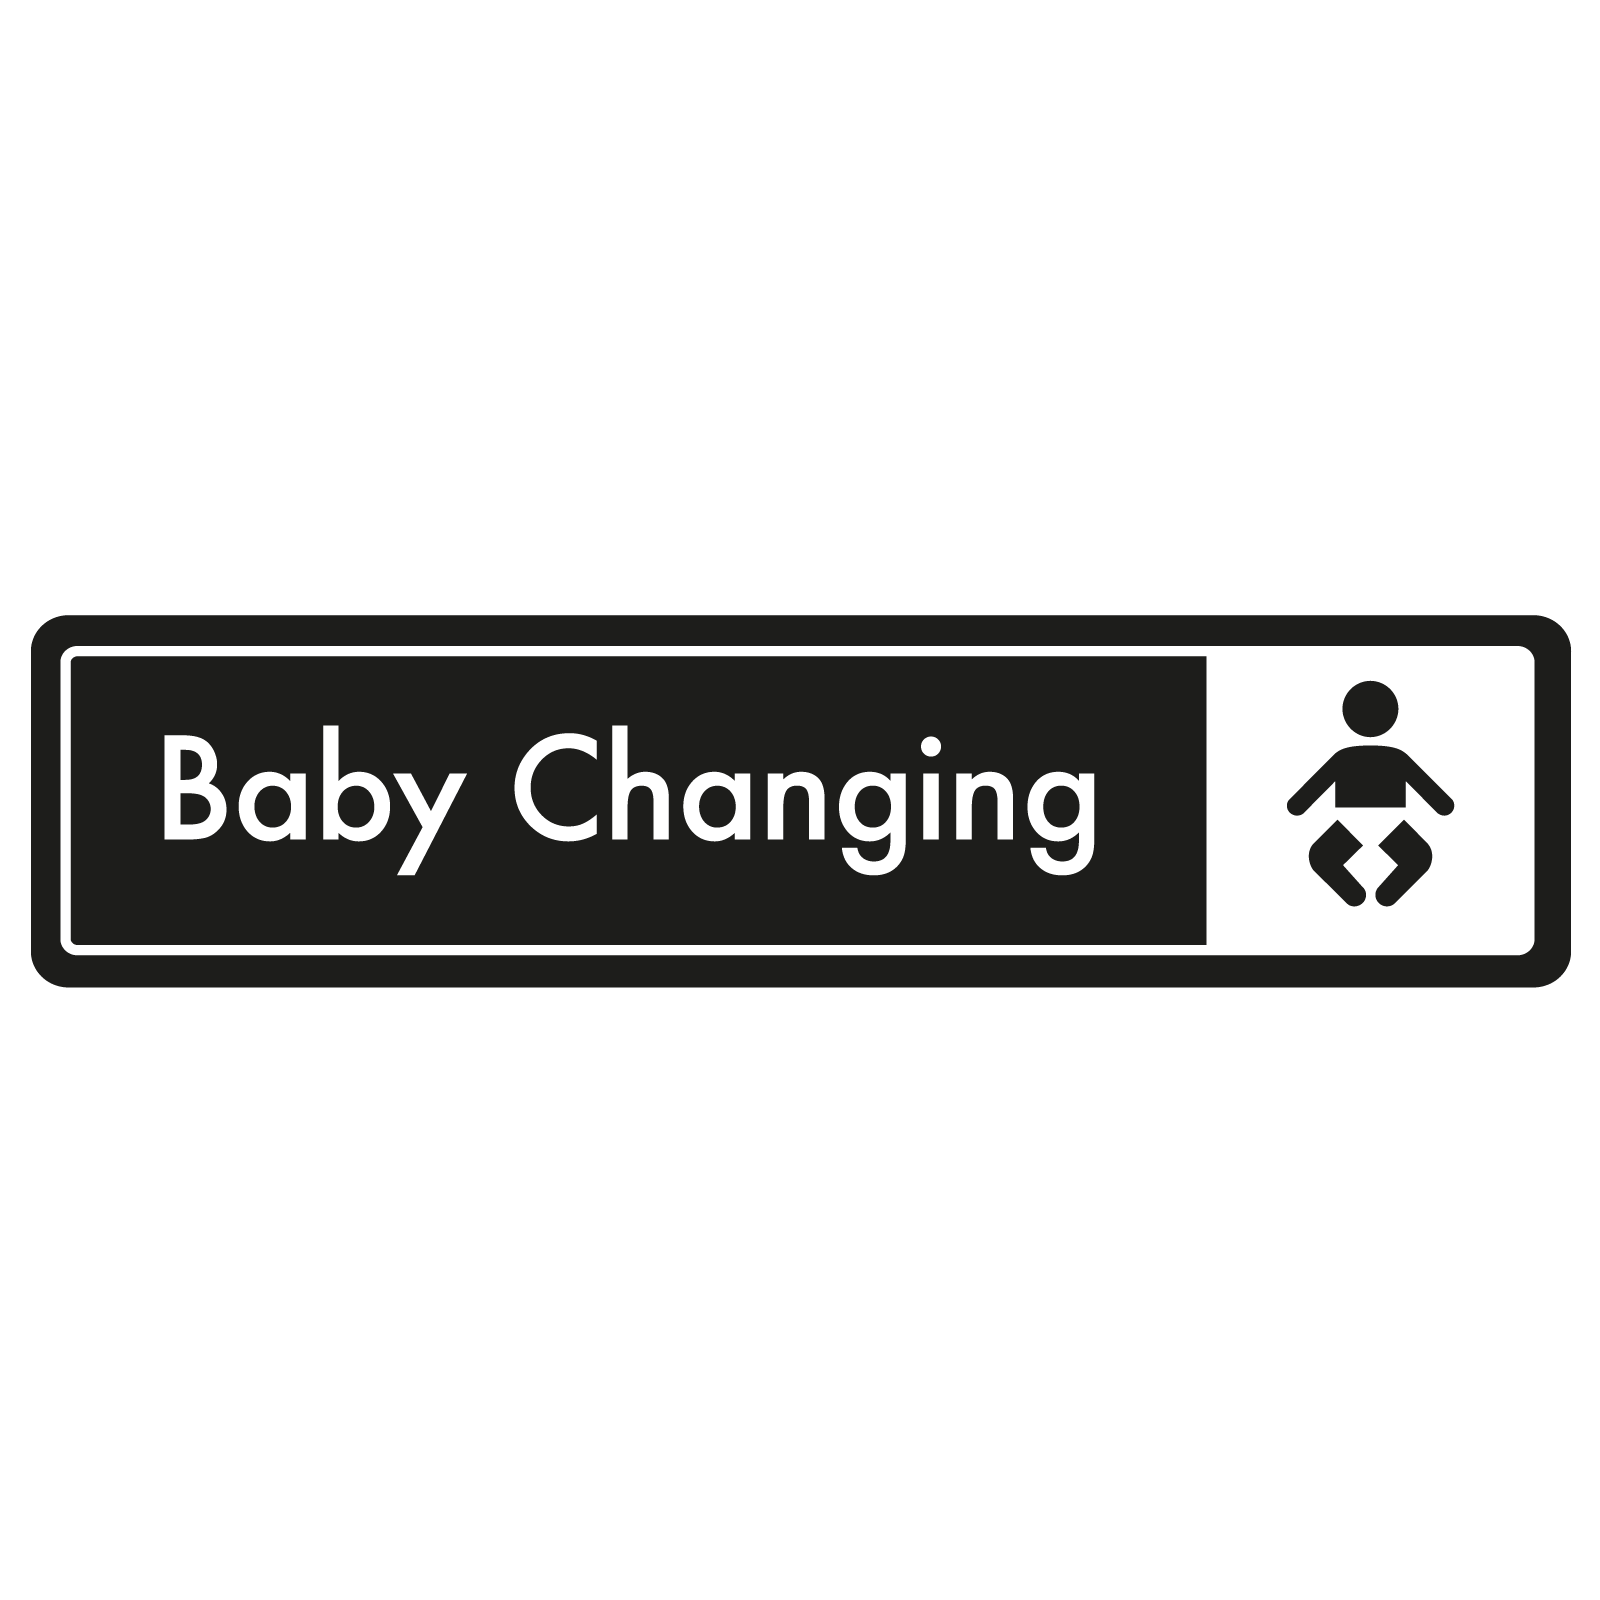 Baby Changing Door Sign - White on Black